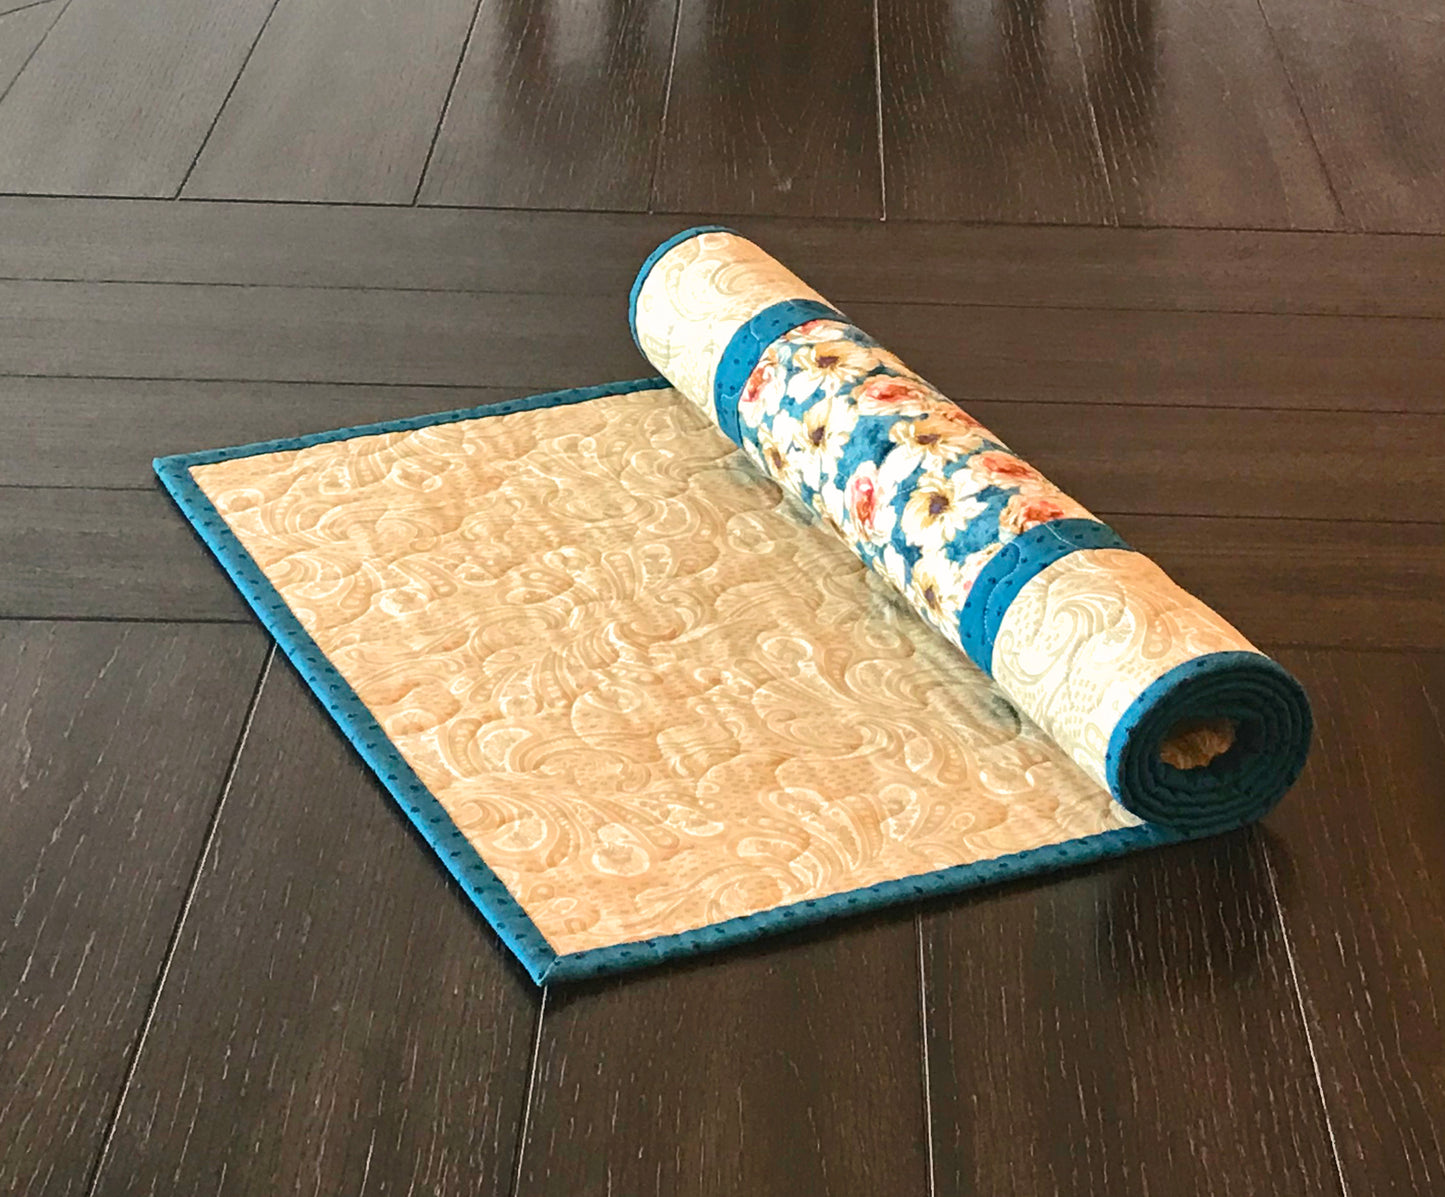 Teal and Cream Floral Table Runner - Handmade Quilts, Digital Patterns, and Home Décor items online - Cuddle Cat Quiltworks